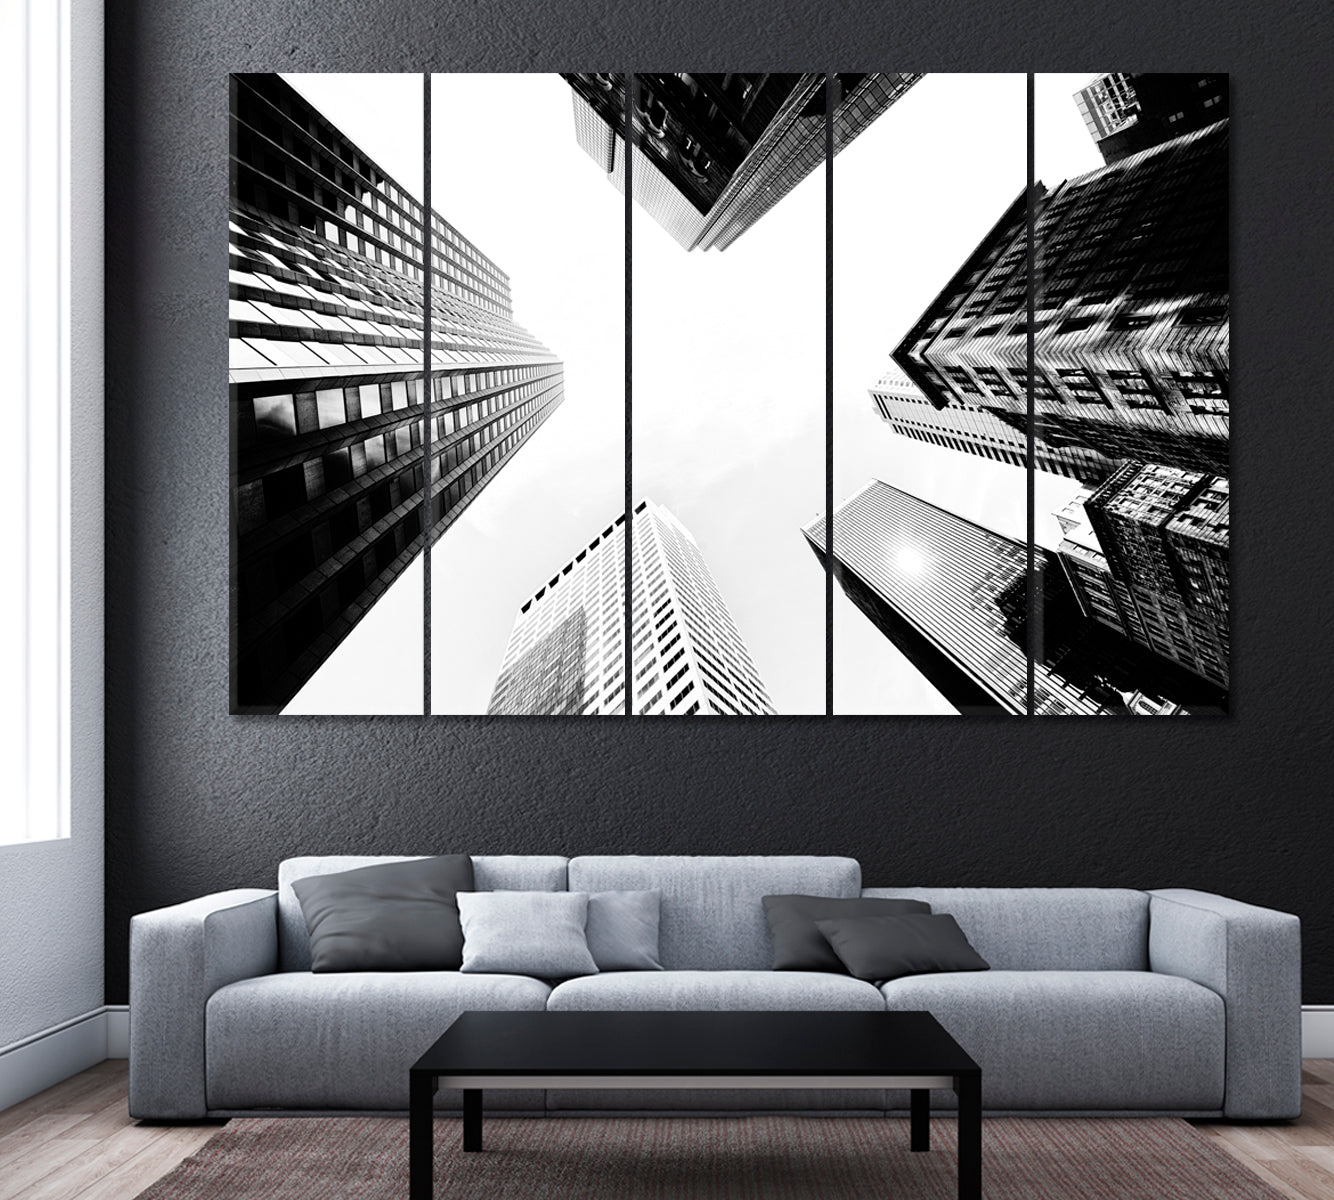 Skyscrapers in Black and White Canvas Print ArtLexy 5 Panels 36"x24" inches 